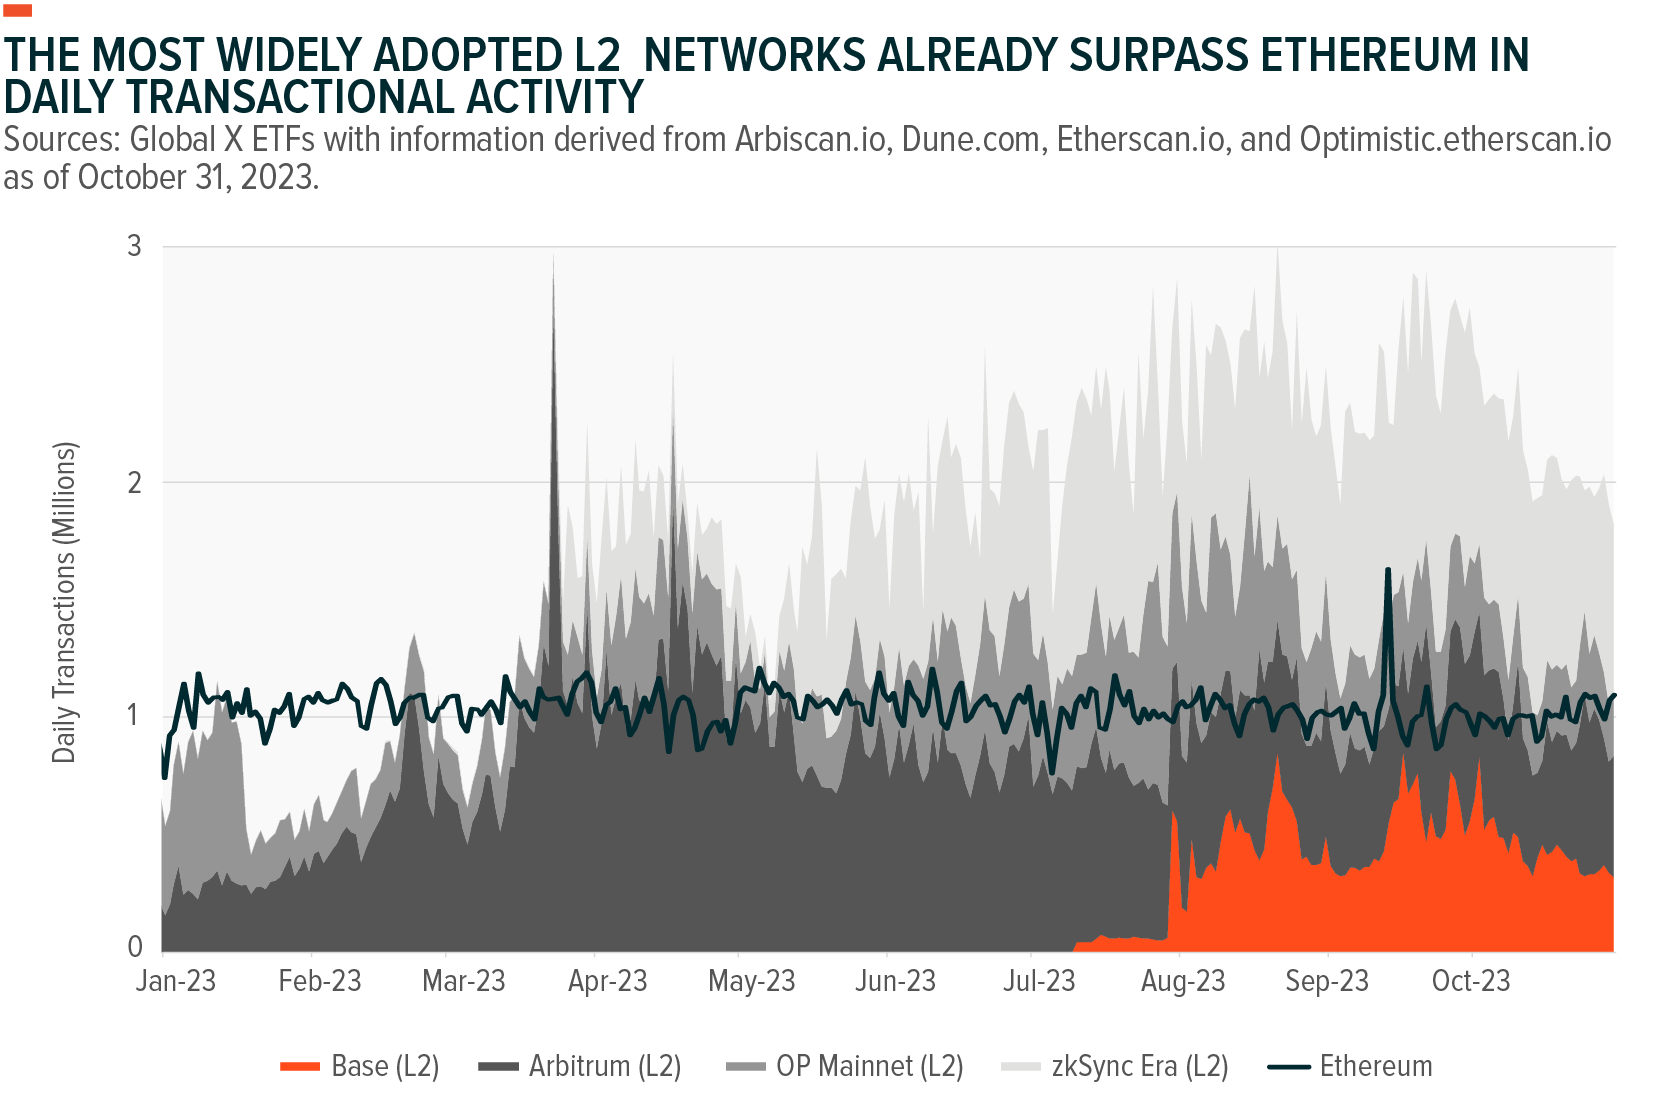 Daily Transactions: L2 Networks vs Ethereum